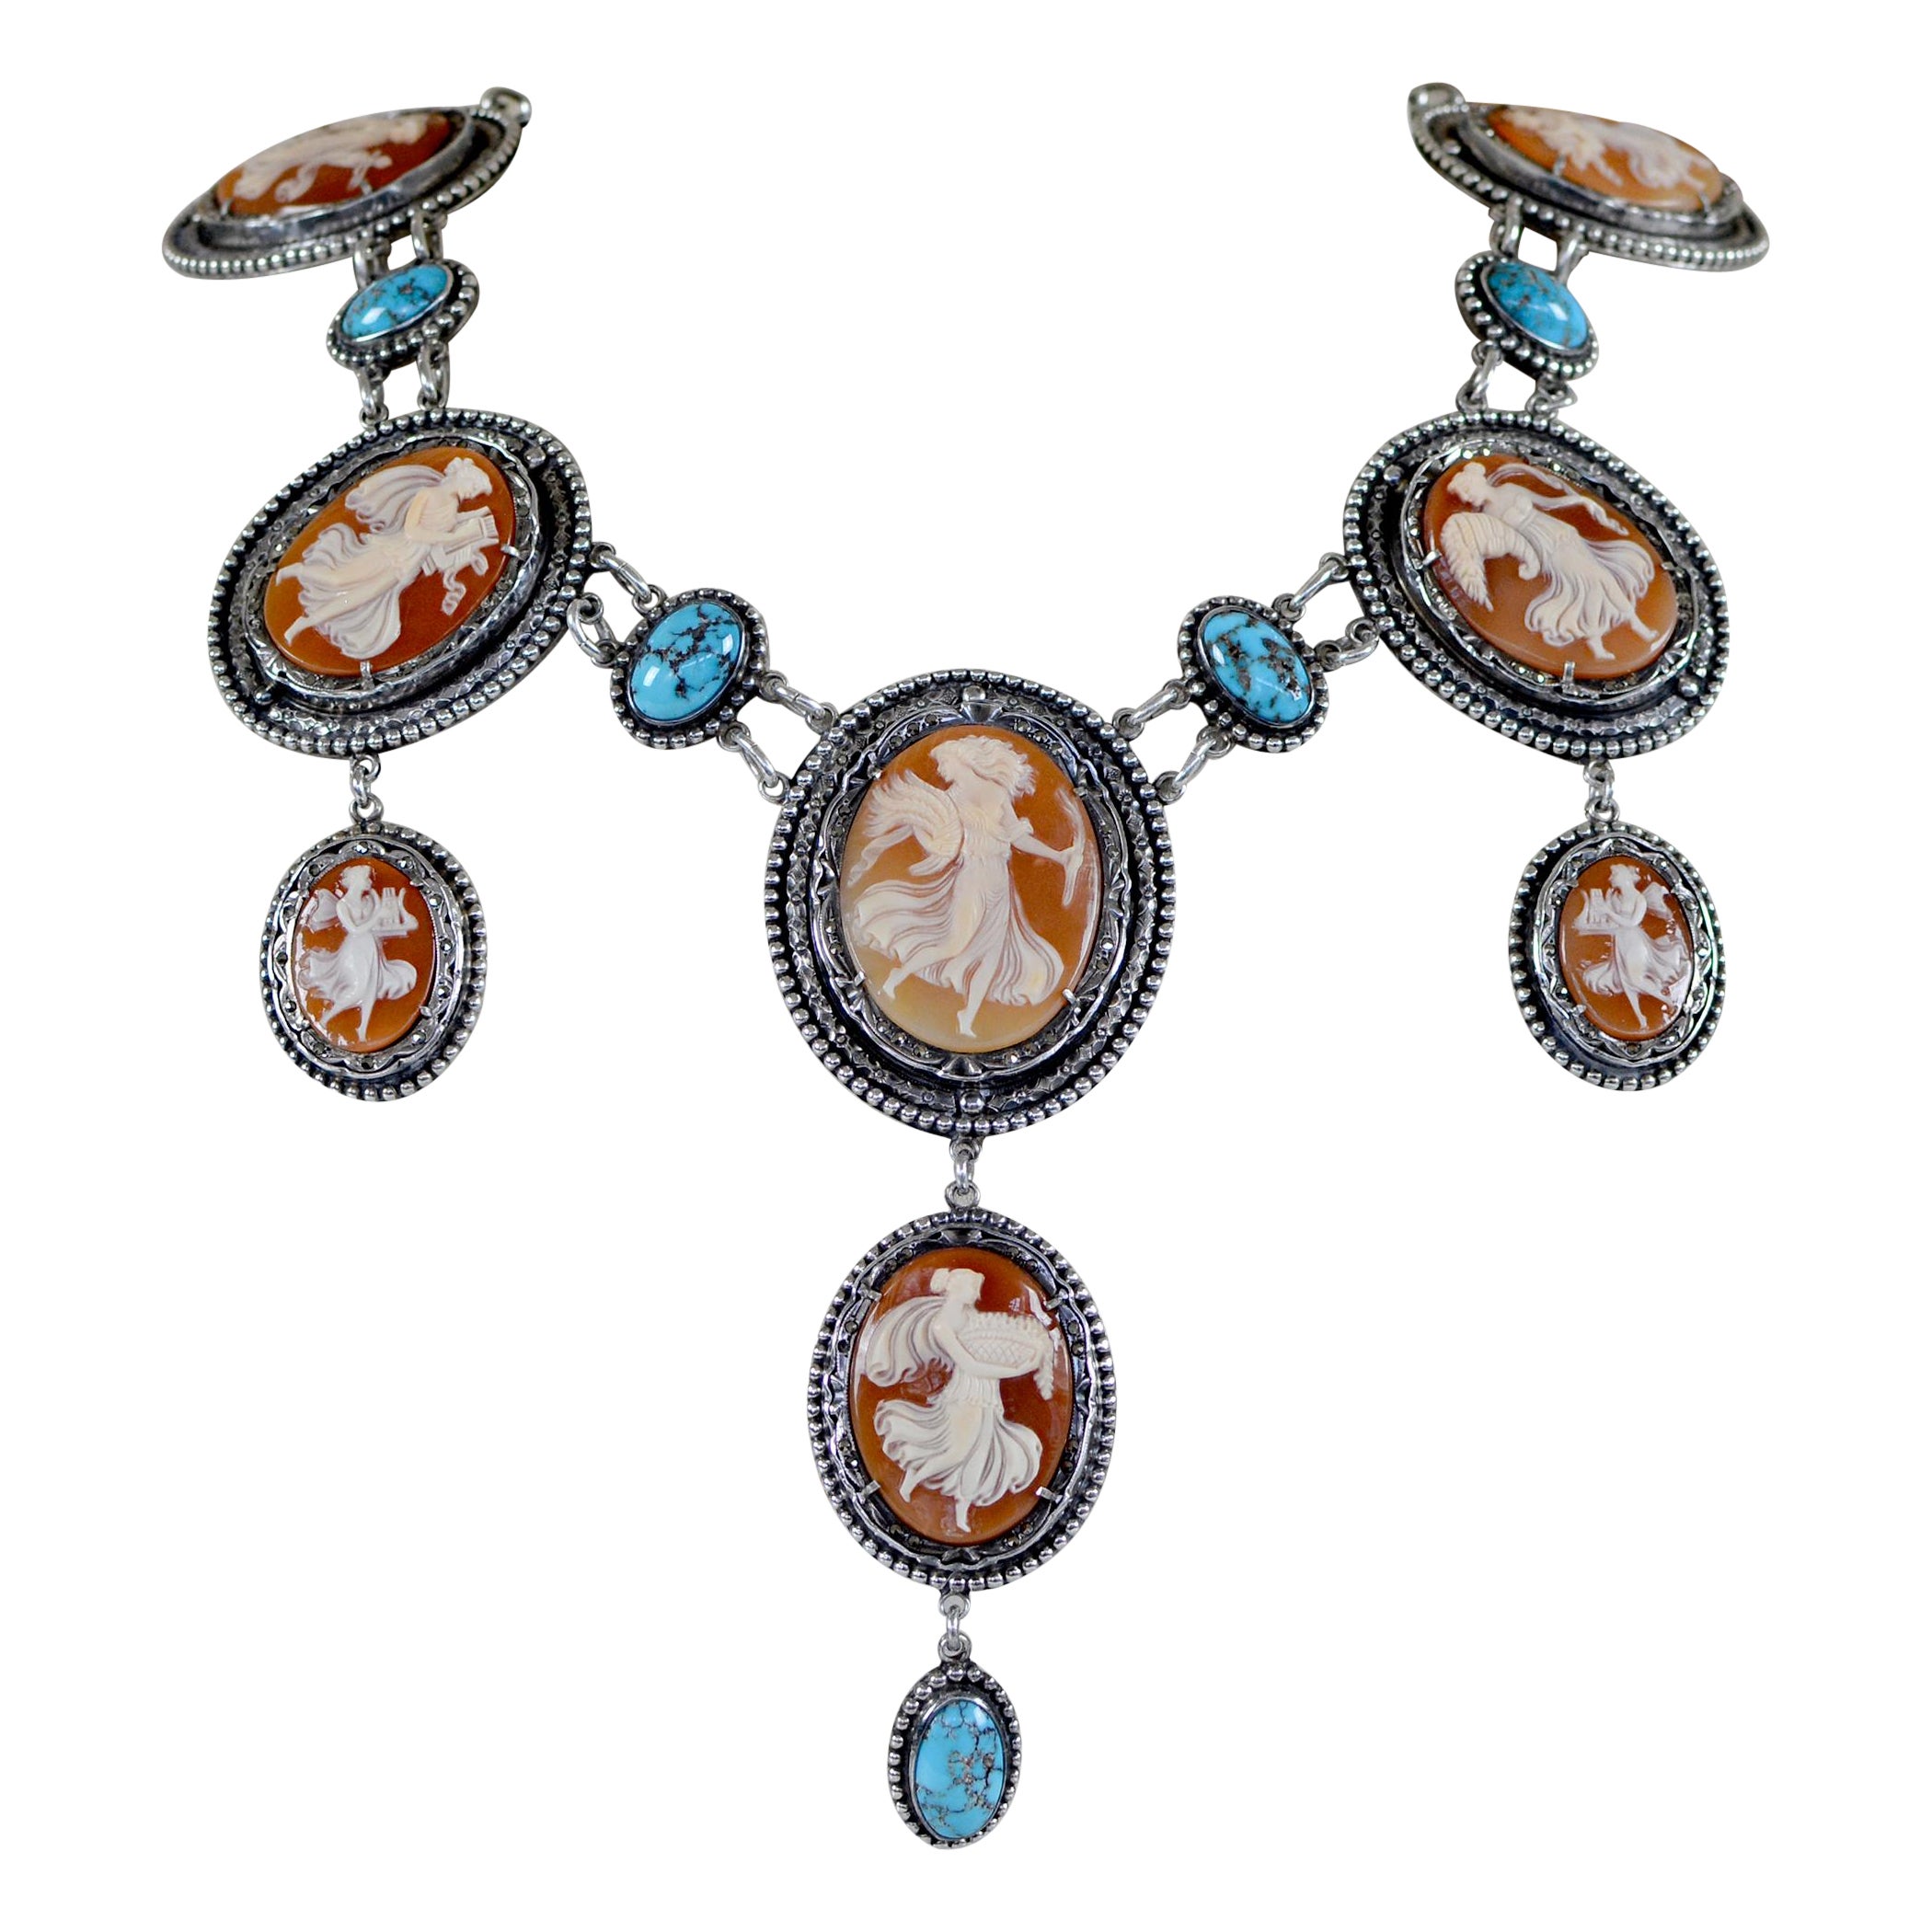 Jill Garber 19th. C. Terpsichore Cameo Suite Necklace with Persian Turquoise  For Sale